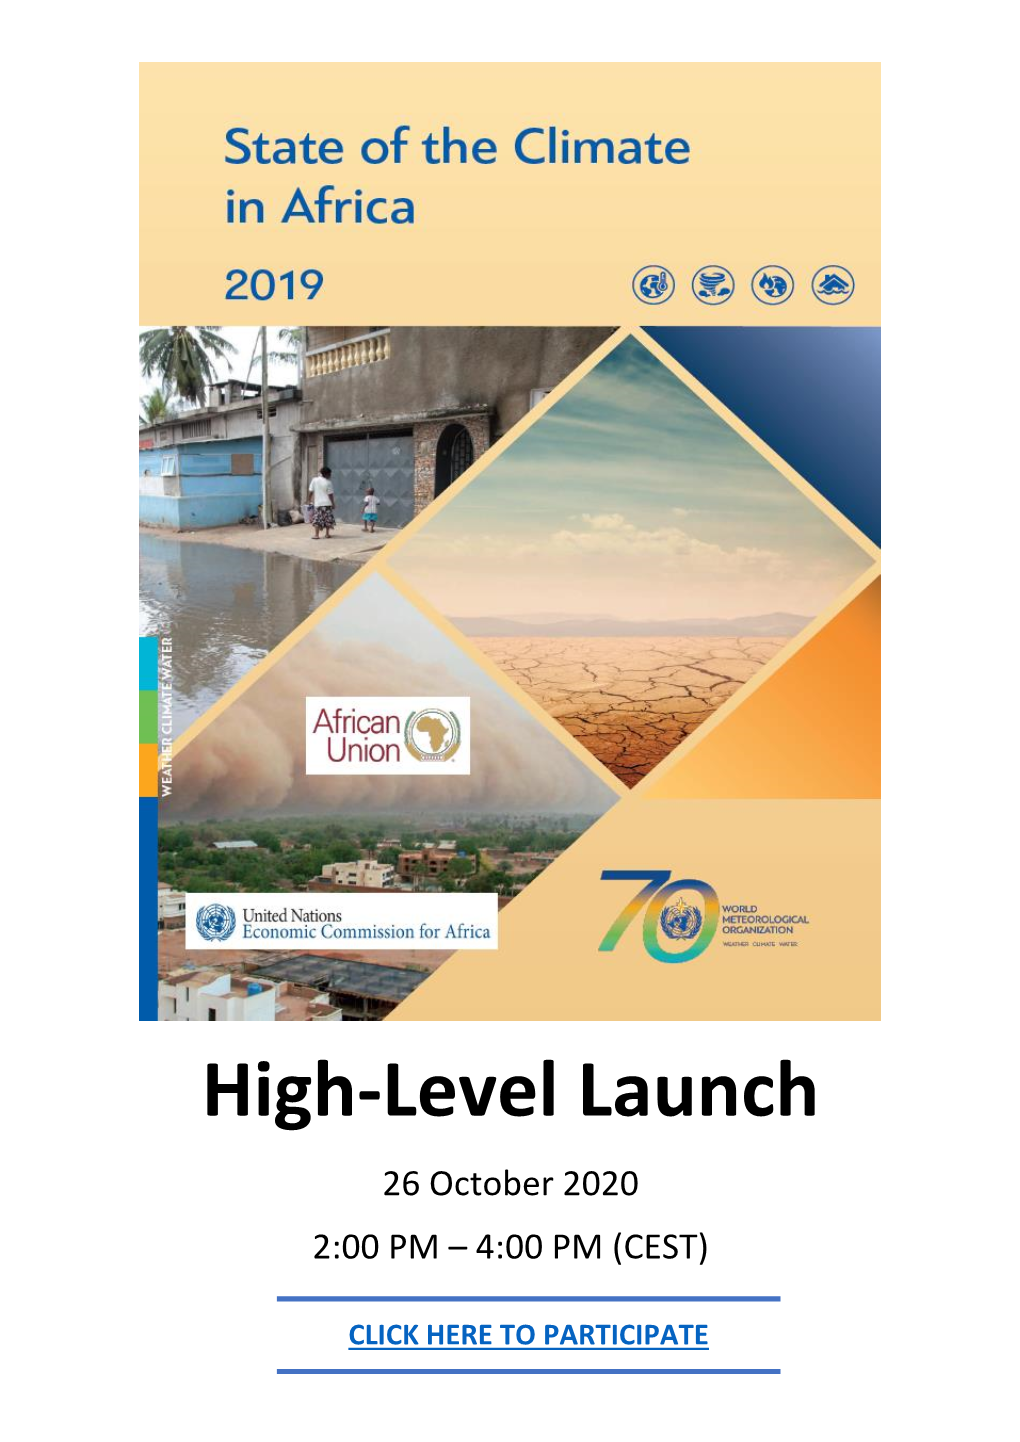 High-Level Launch 26 October 2020 2:00 PM – 4:00 PM (CEST)